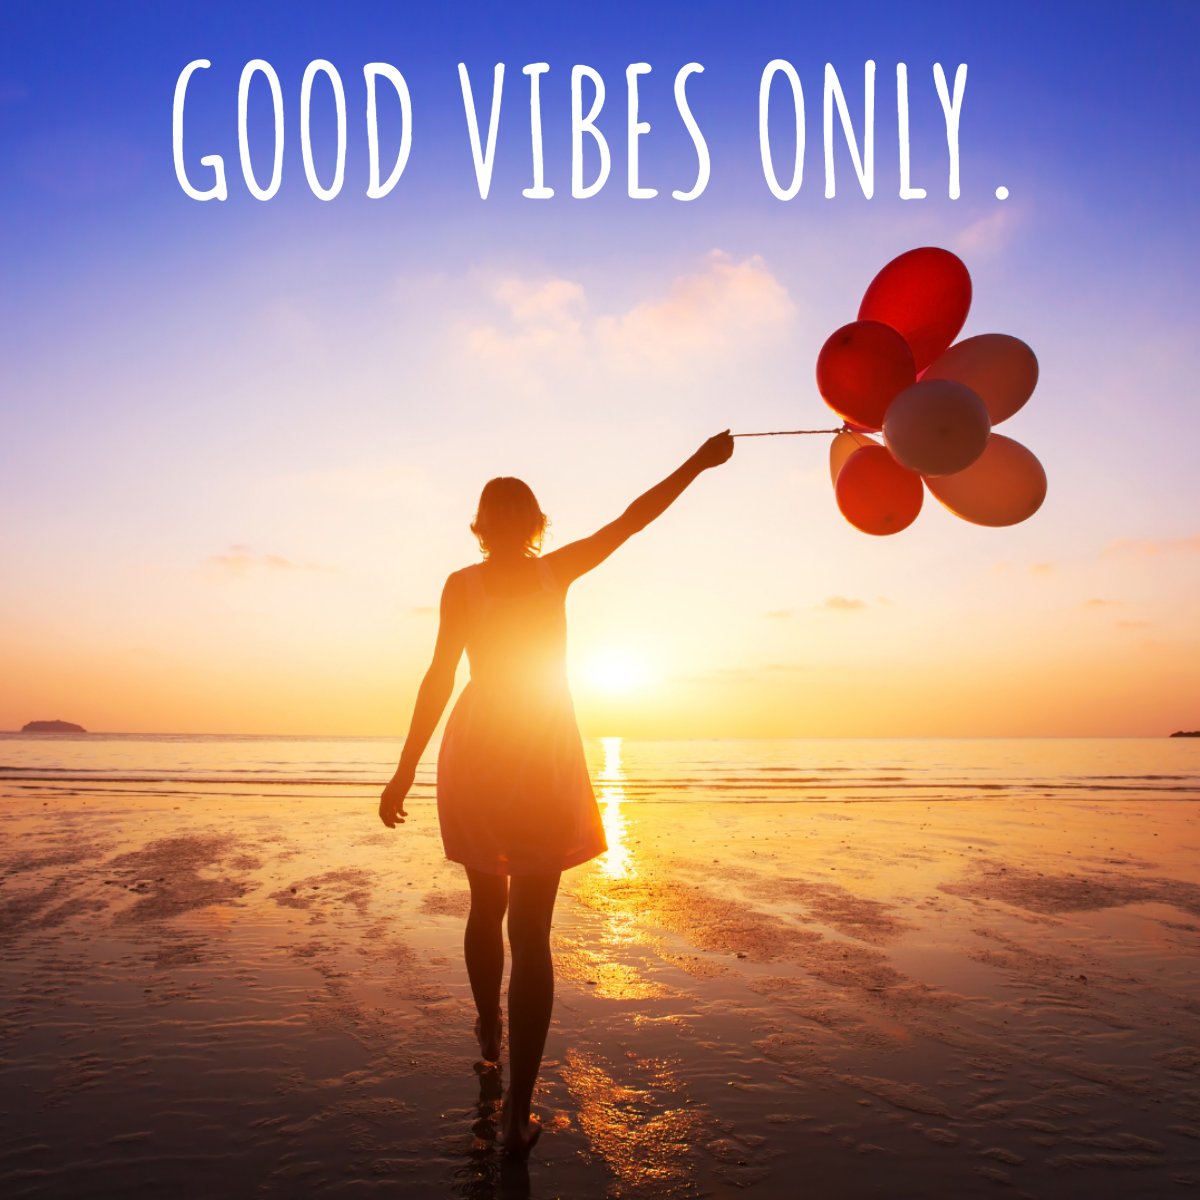 Good Vibes Only...🙆✌️

#goodvibesonly✌️ #vibes #goodvibes #positivevibes #goodquote #goodenergyonly #instagood
 #realestatelionazreatlortophomesalelionhomeloans